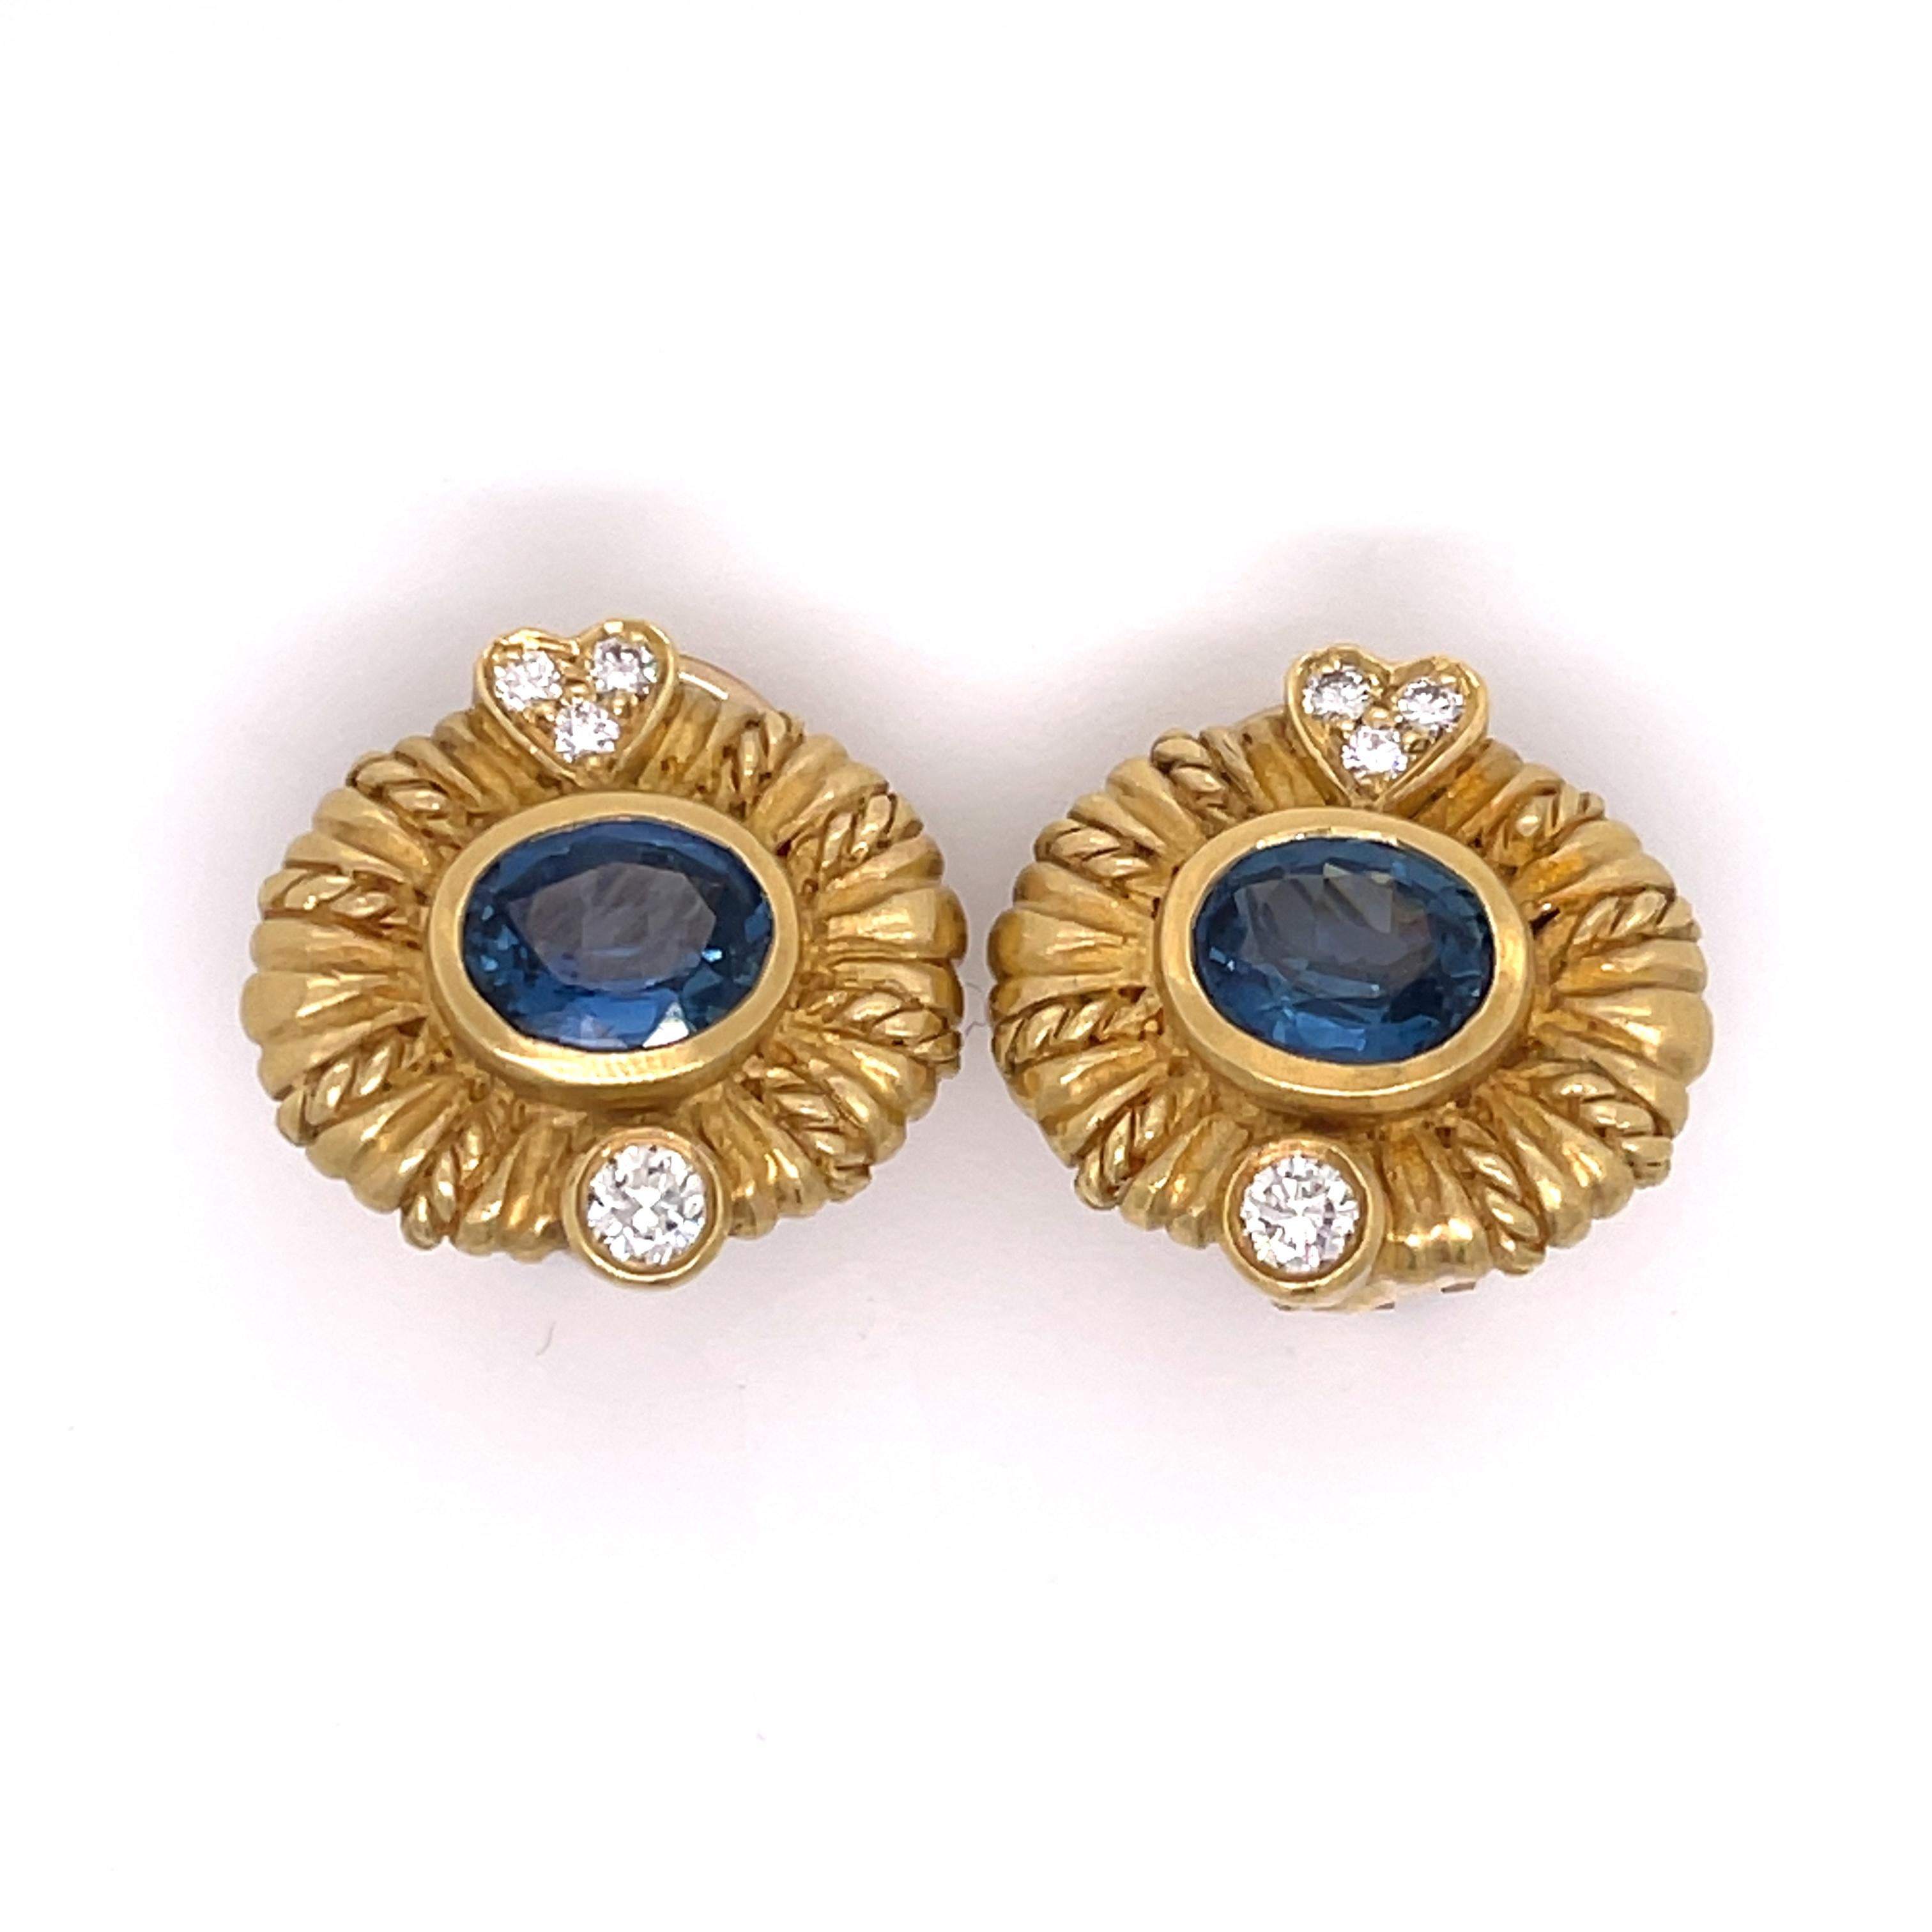 Judith Ripka 18K Yellow Gold Sapphire and Diamond Earrings. These sweet treats for your ear are clip on for the clip on fans. They also have the ability to drop charms off them. Sweet hearts at the top of earring which have three diamonds in them.